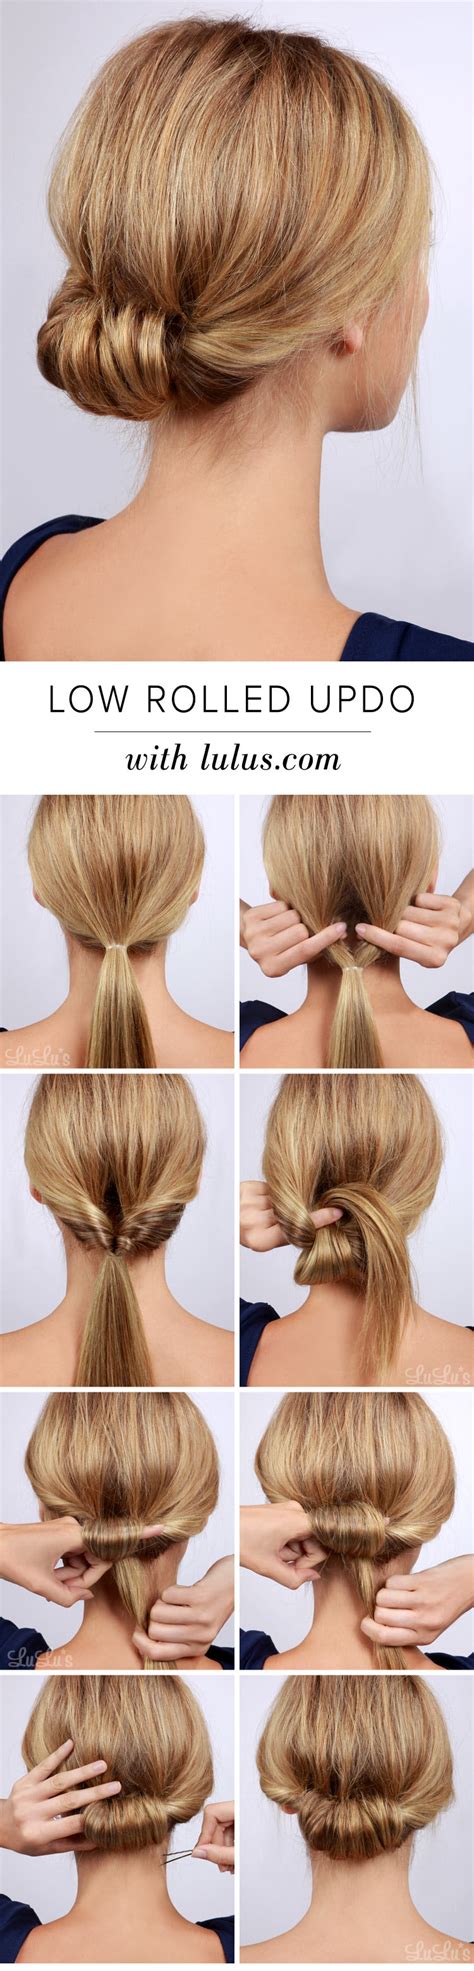 Lulus How To Low Rolled Updo Hair Tutorial Fashion Blog